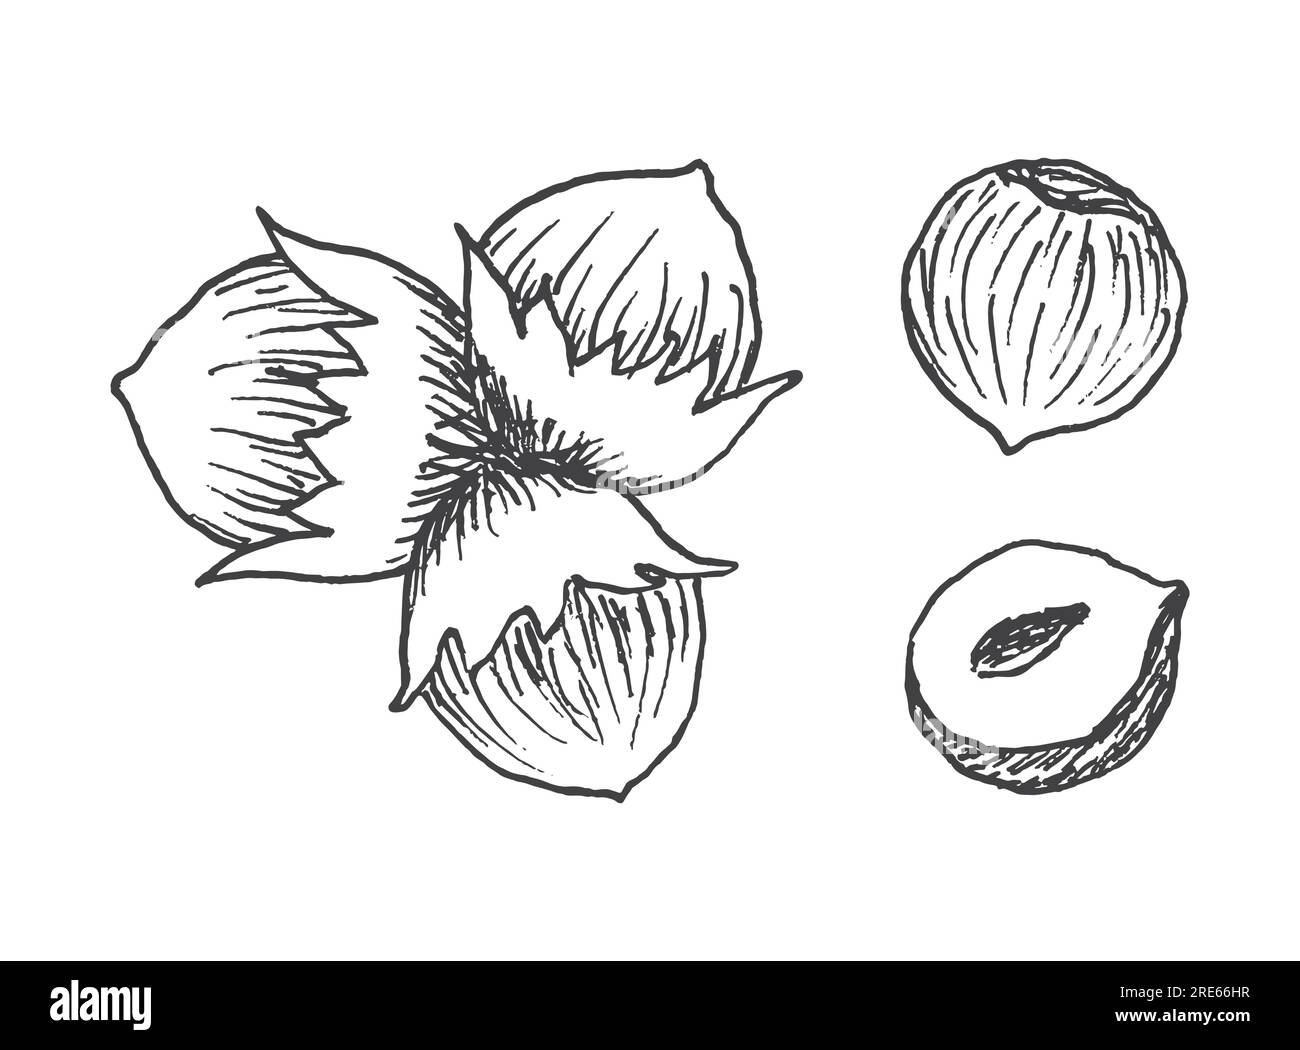 Set of detailed hand drawn hazelnuts isolated on white background. Stock Vector